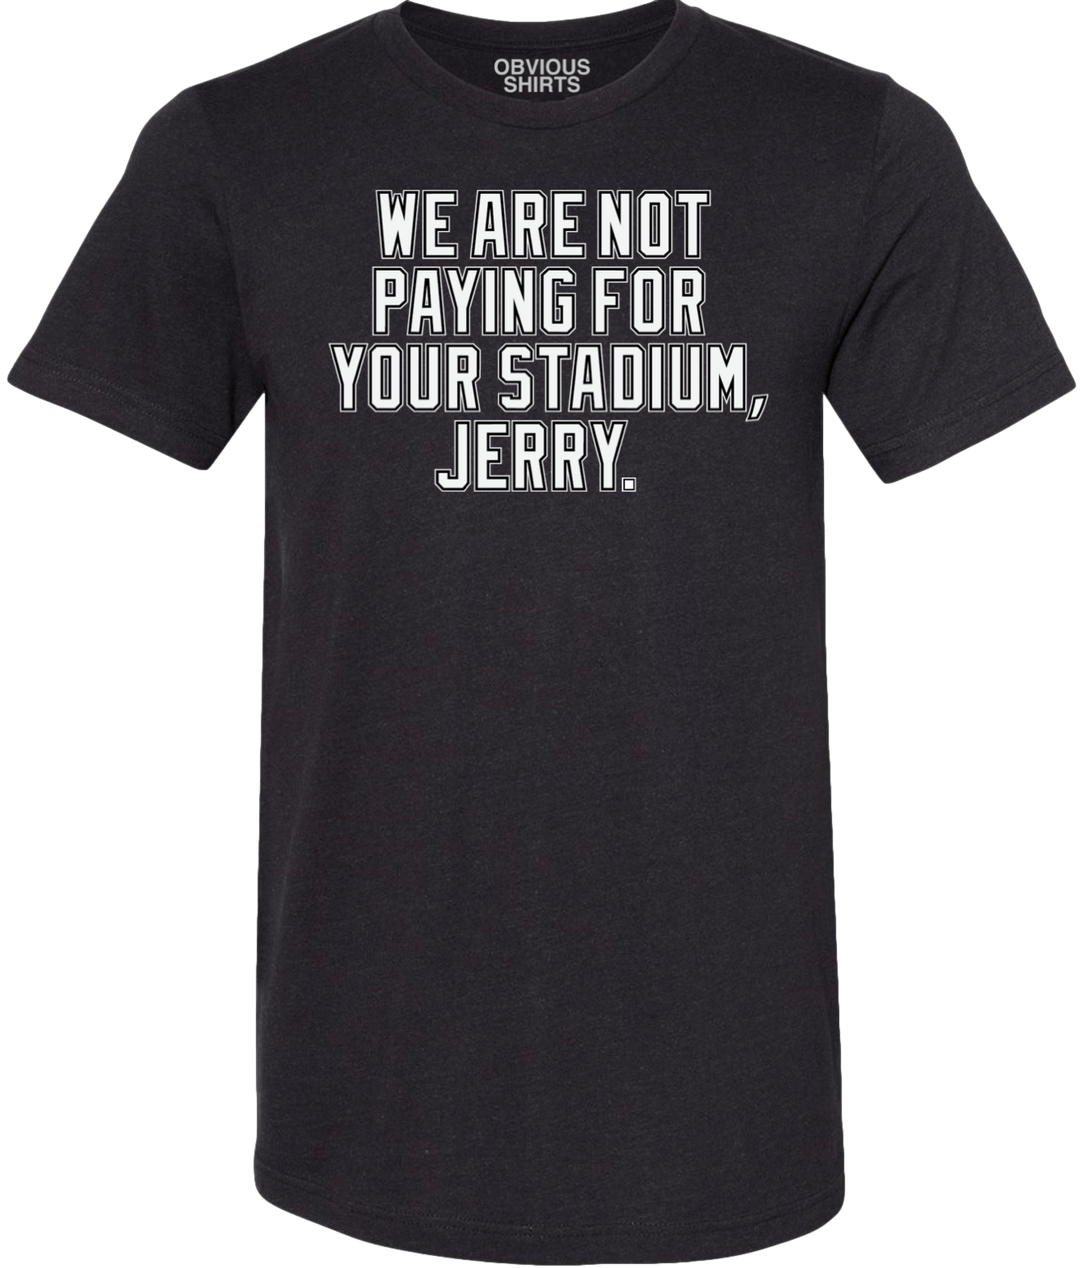 WE ARE NOT PAYING FOR YOUR STADIUM, JERRY. - OBVIOUS SHIRTS